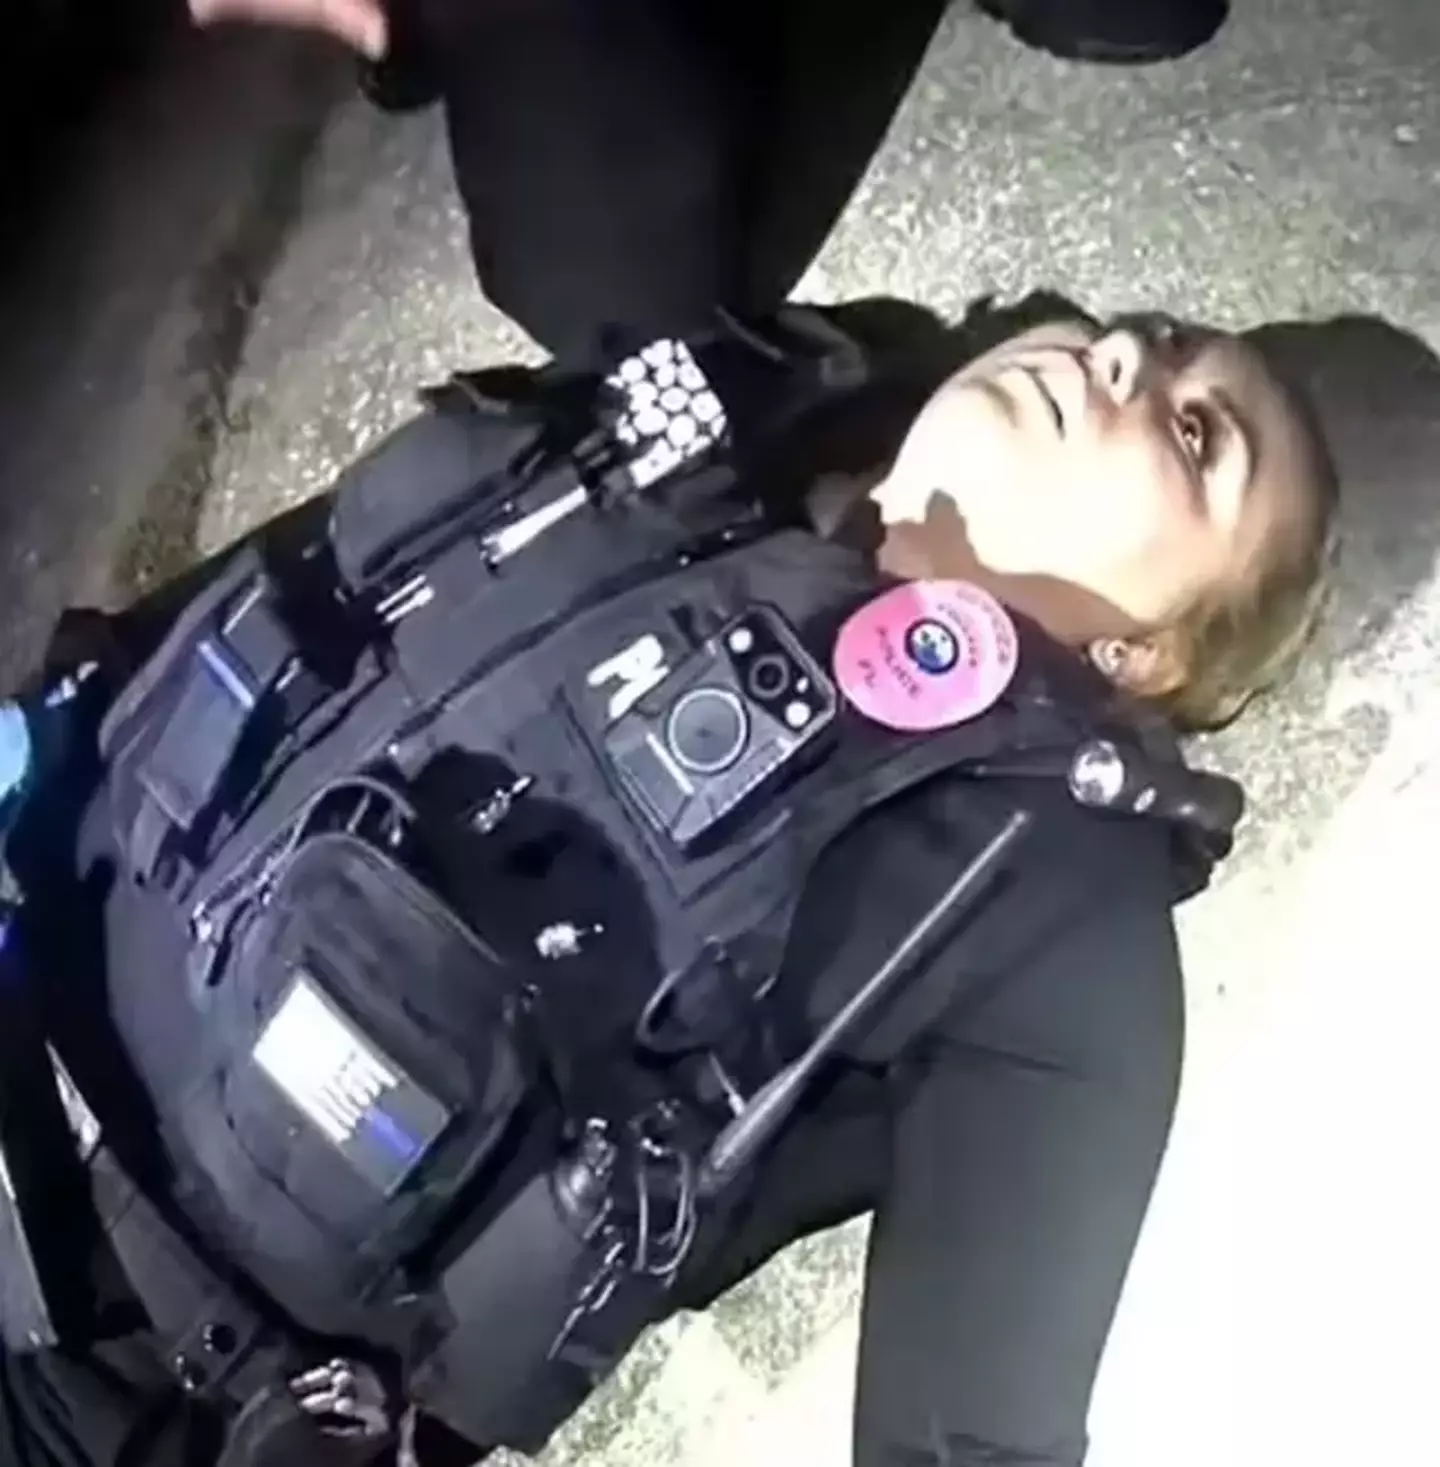 Shocking police bodycam footage shows the moment an officer 'overdoses' on fentanyl during a routine traffic stop.